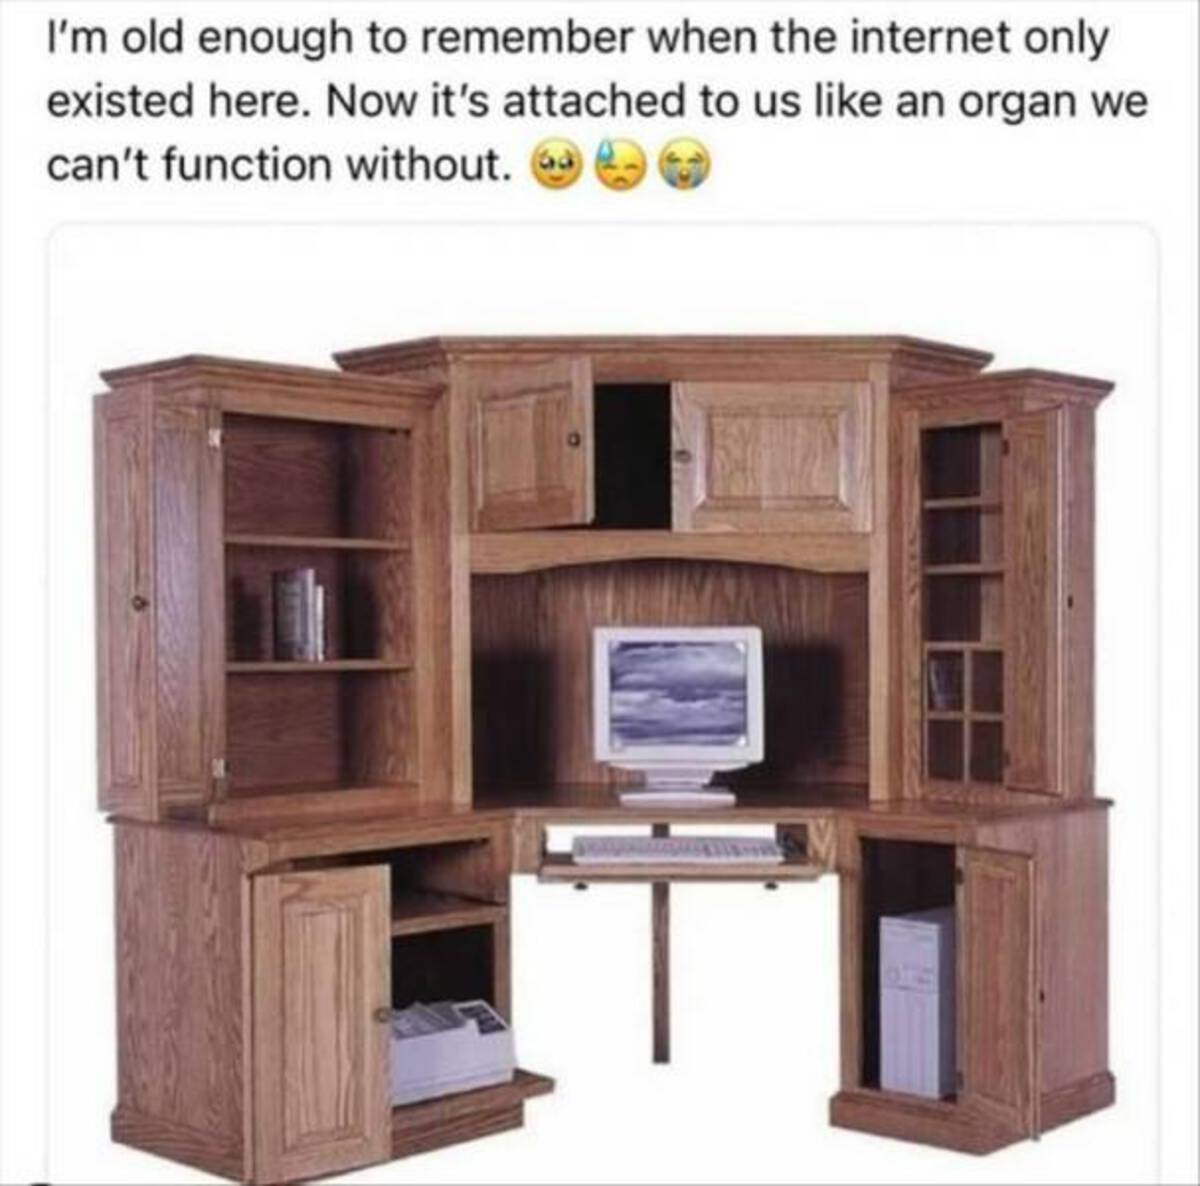 Internet meme - I'm old enough to remember when the internet only existed here. Now it's attached to us an organ we can't function without. 63